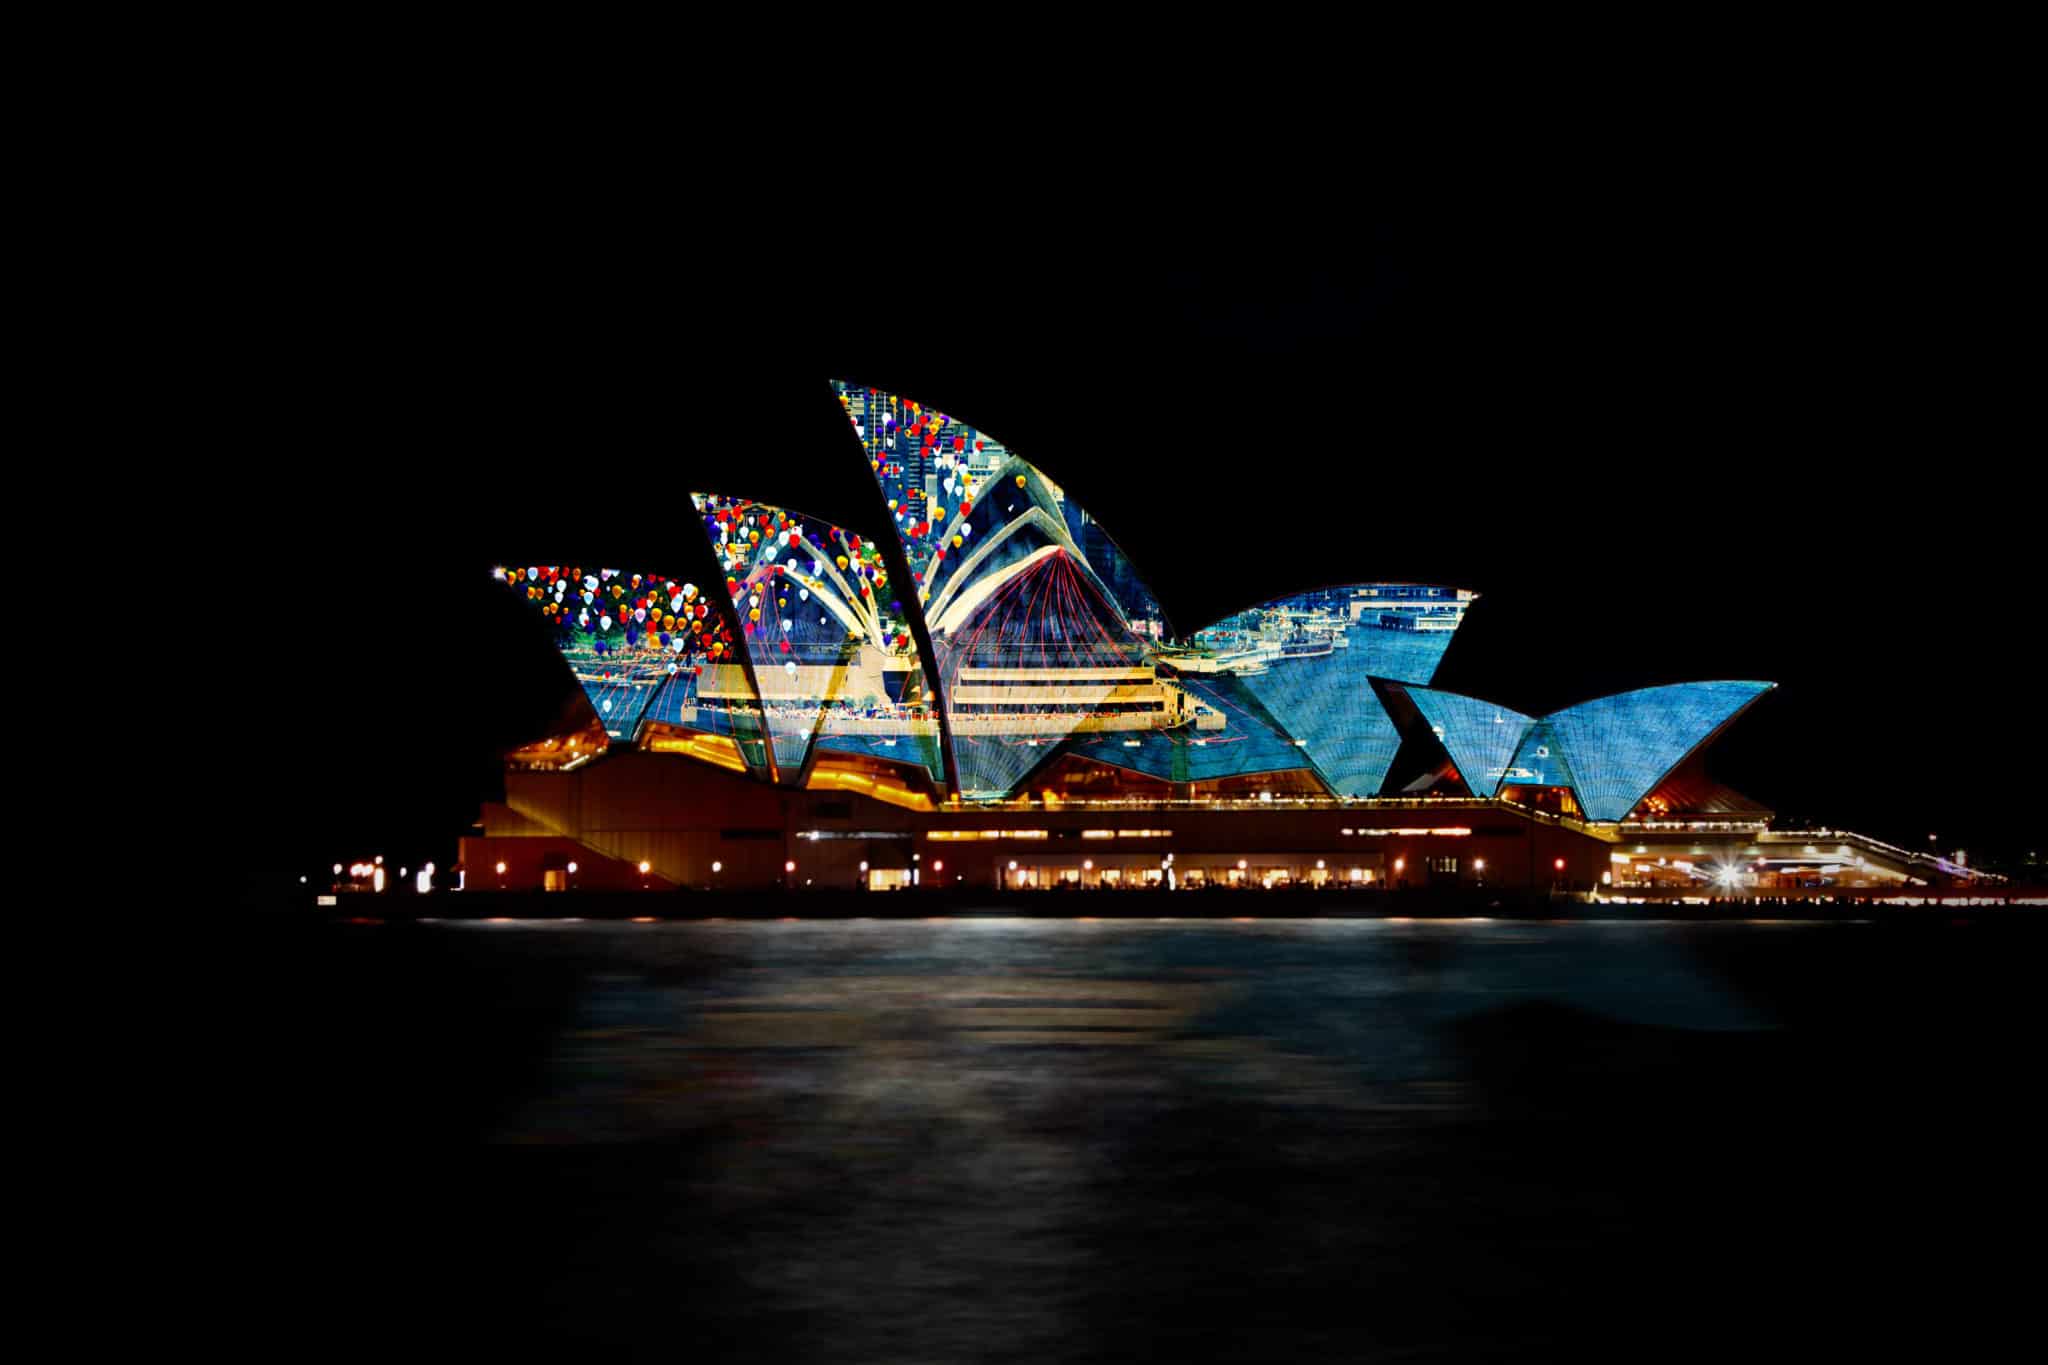 Sydney Opera House Is Celebrating Its 50th Anniversary With A